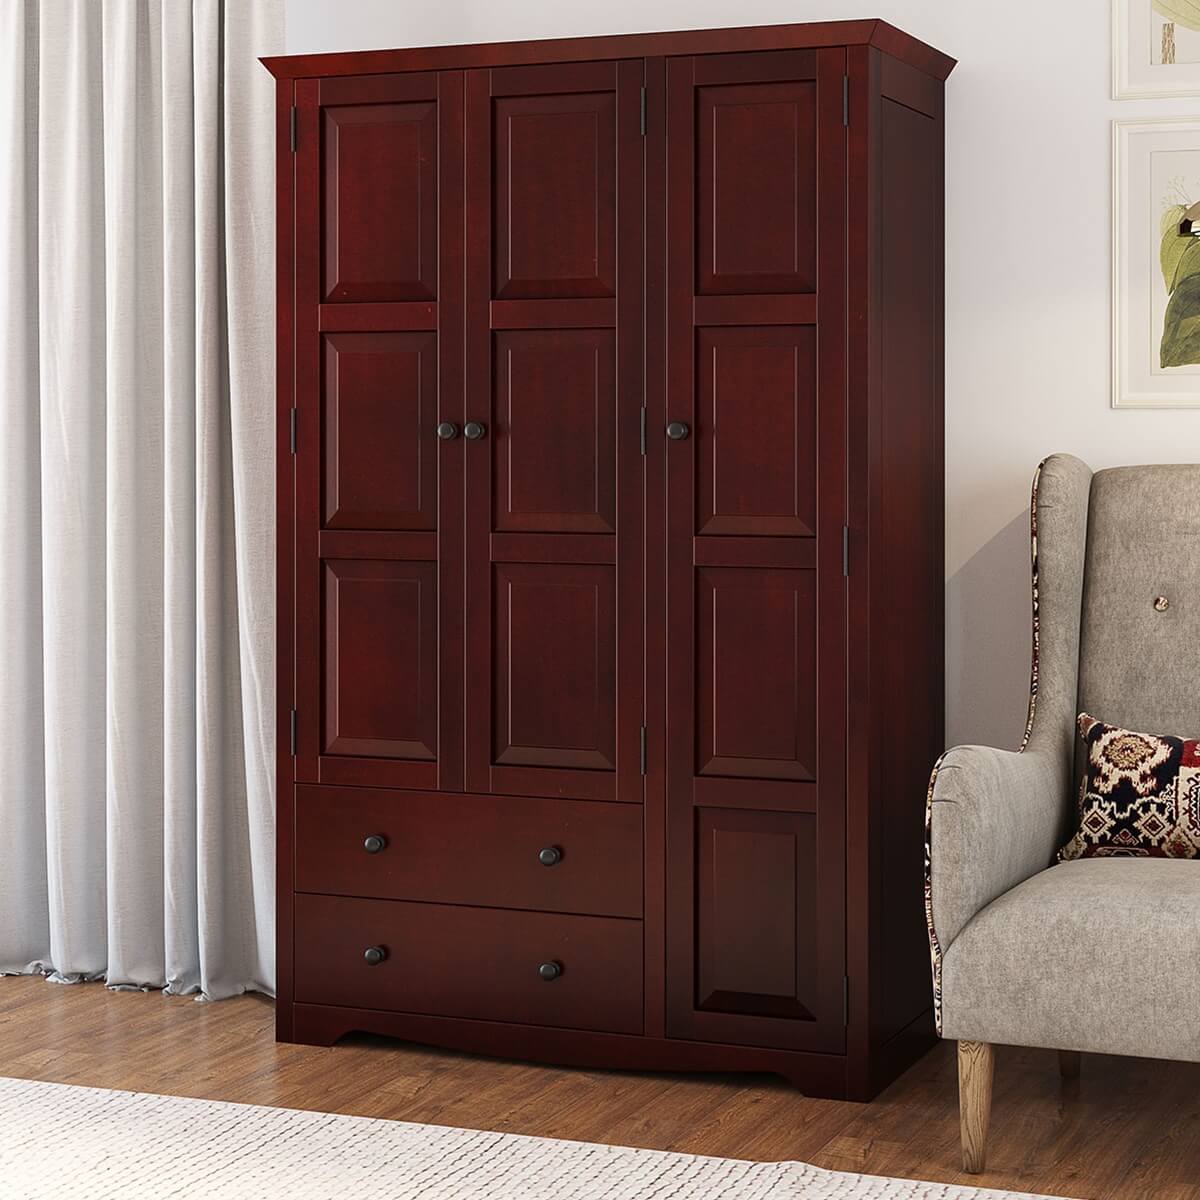 https://www.sierralivingconcepts.com/images/thumbs/0397860_carina-modern-solid-mahogany-wood-large-clothing-armoire-wardrobe.jpeg